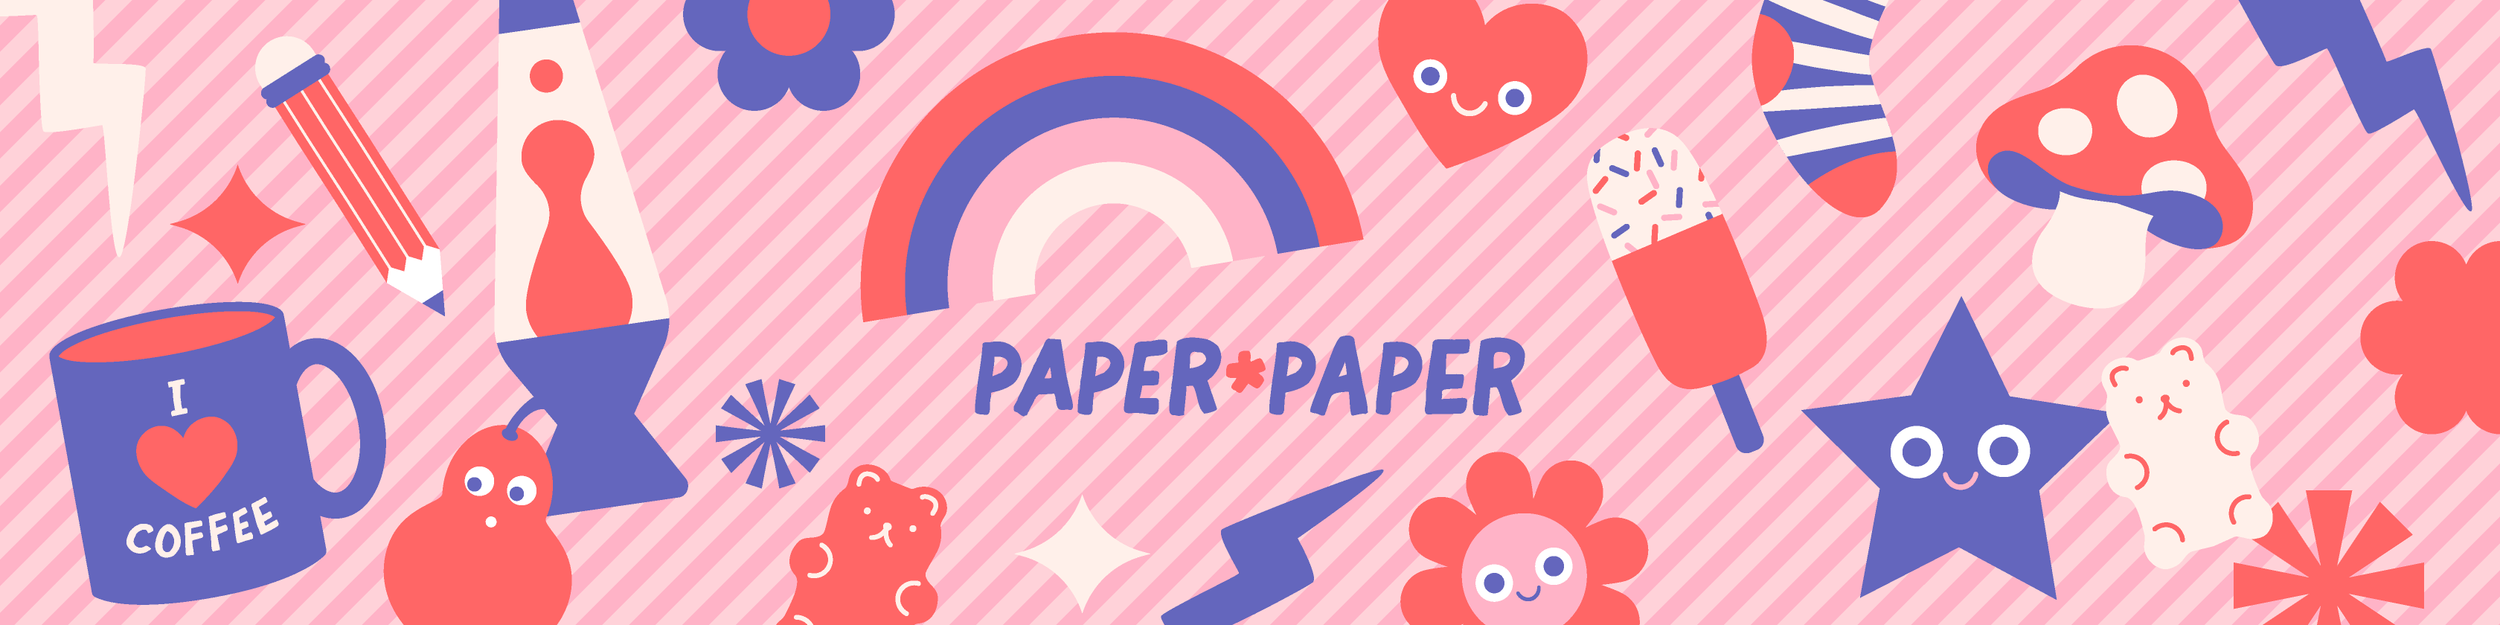 PaperPaper